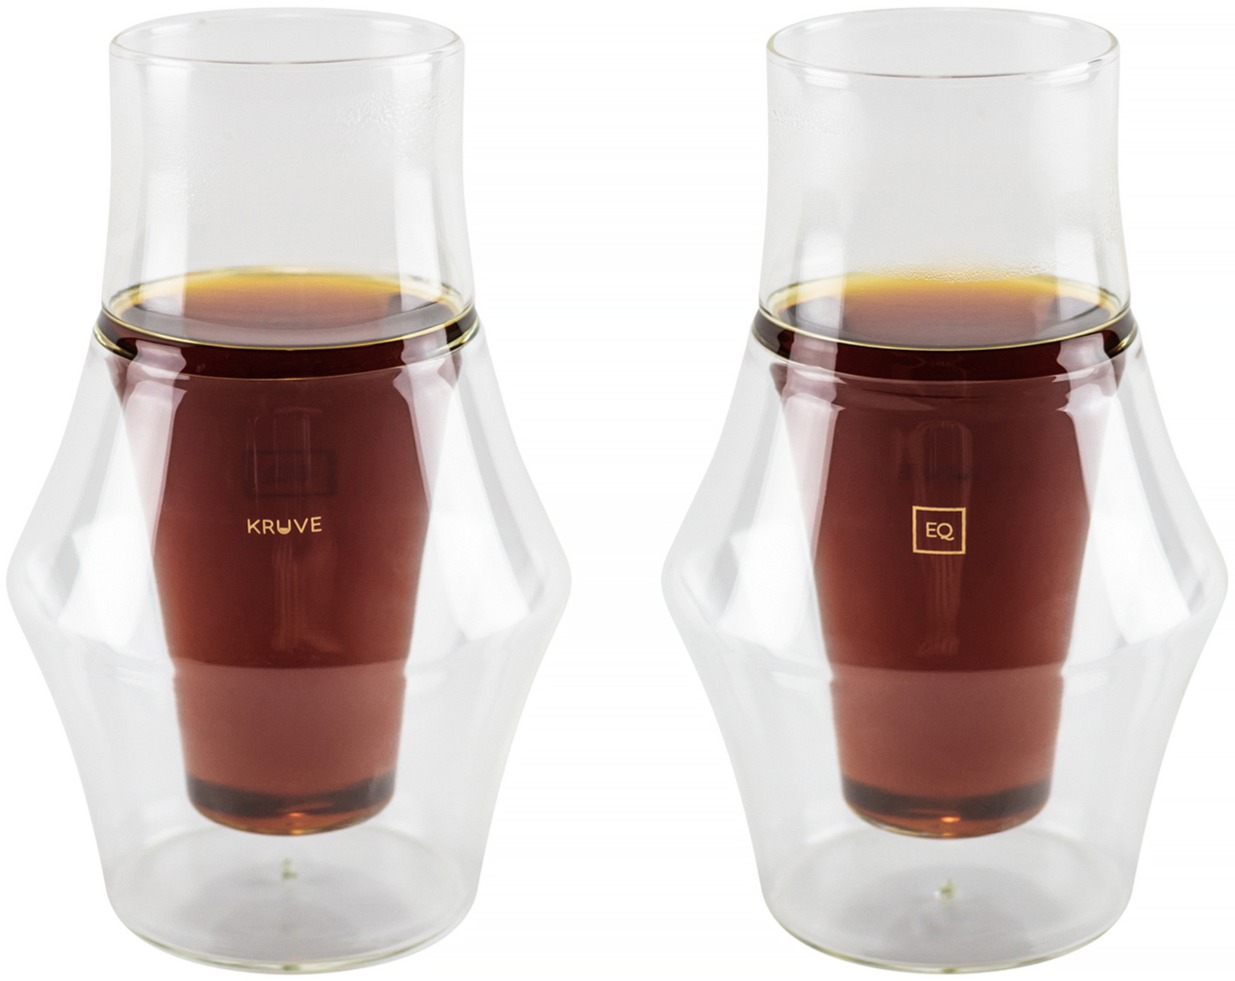 KRUVE - Awesome photo of the Propel Espresso Glass by